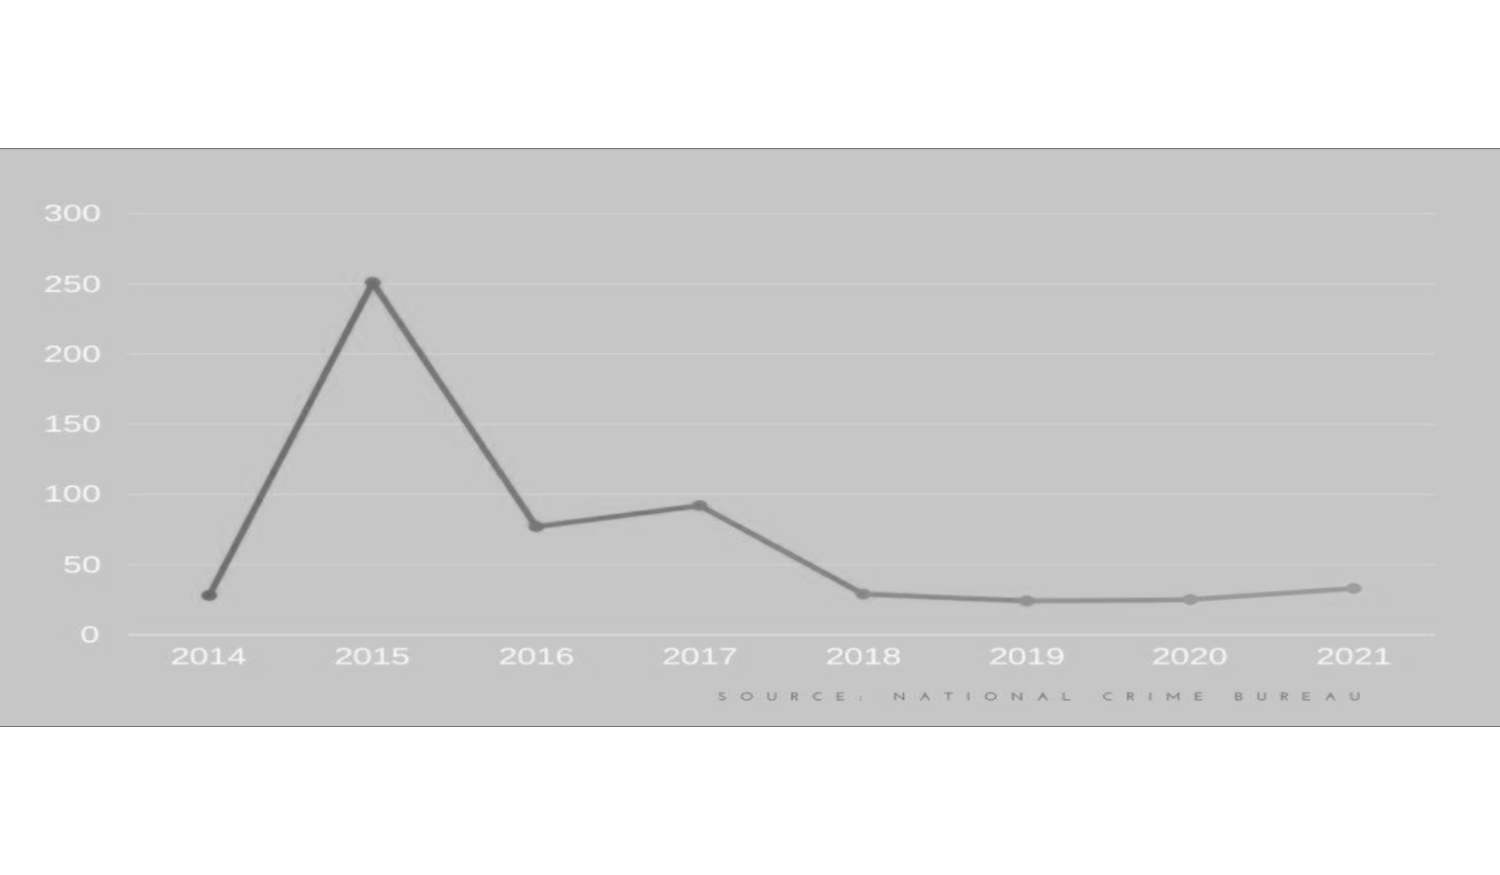 a graph showing statistics of honor killings in India